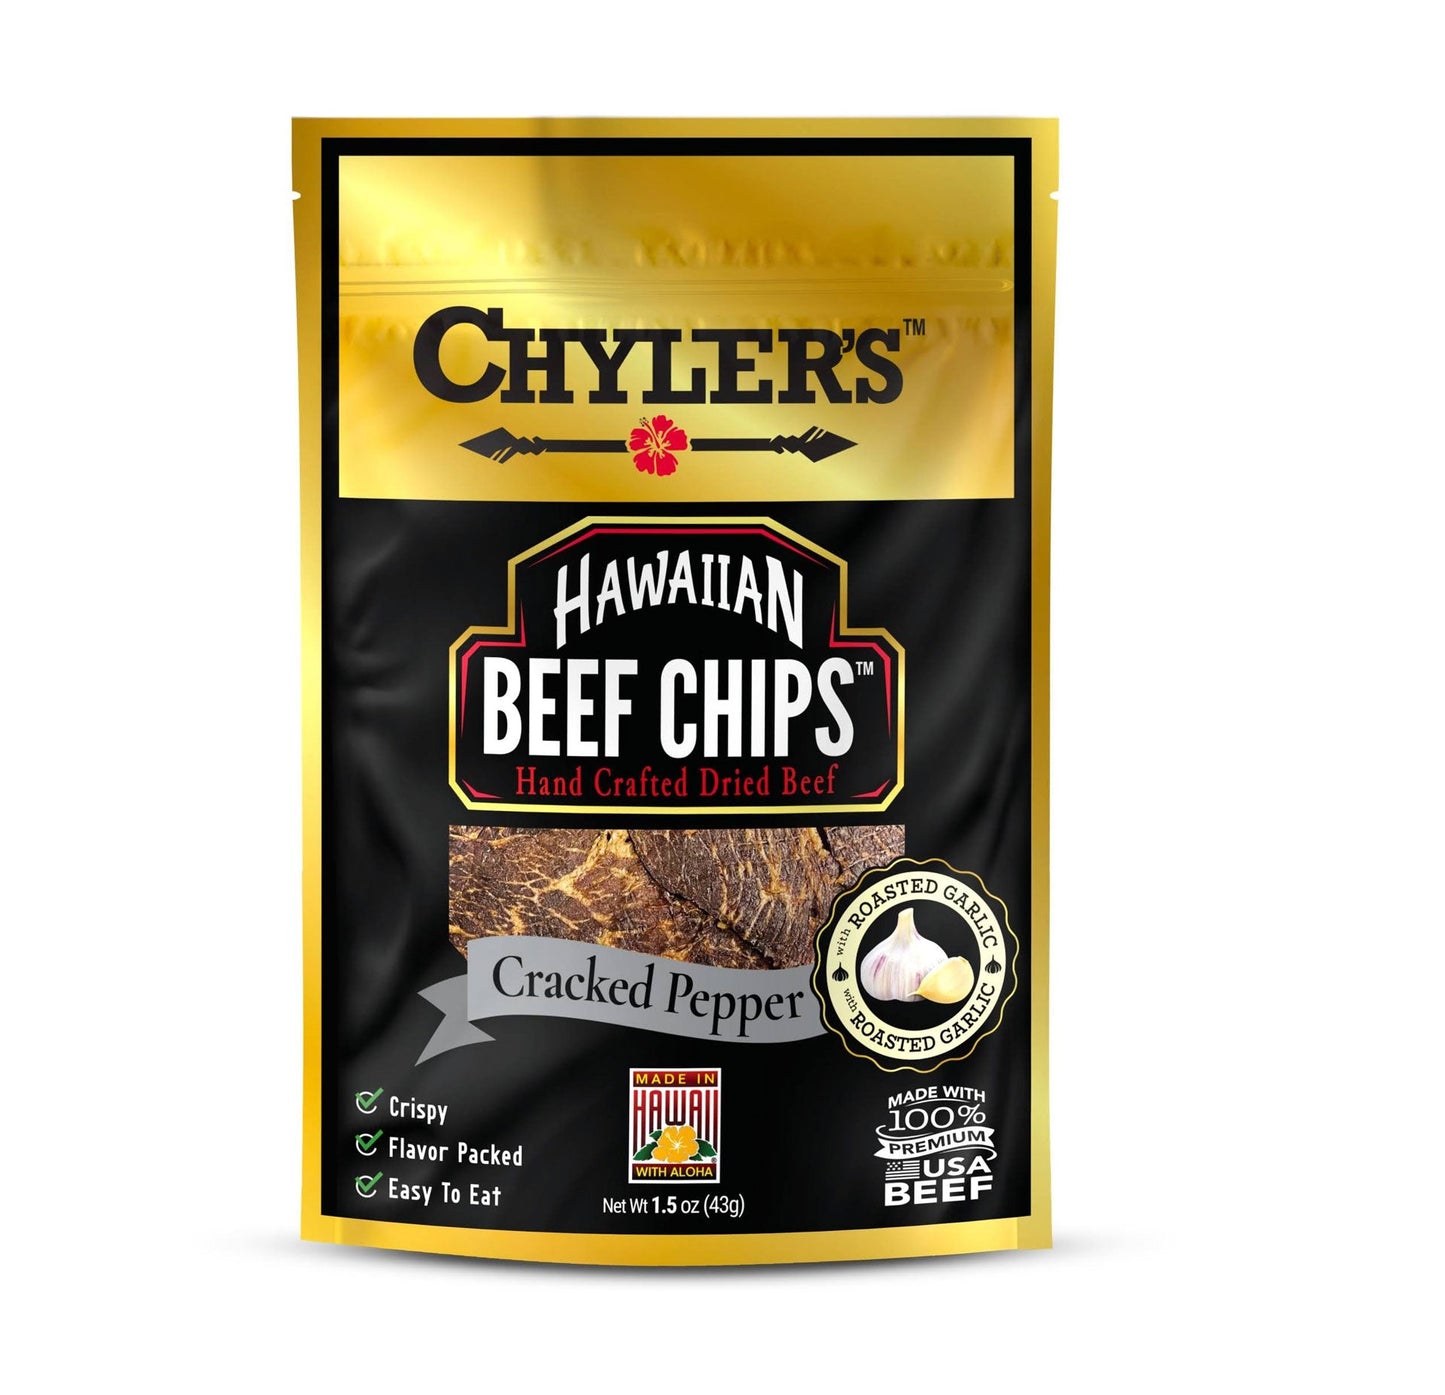 Hawaiian Beef Chips™ Cracked Pepper with Roasted Garlic - Chylers